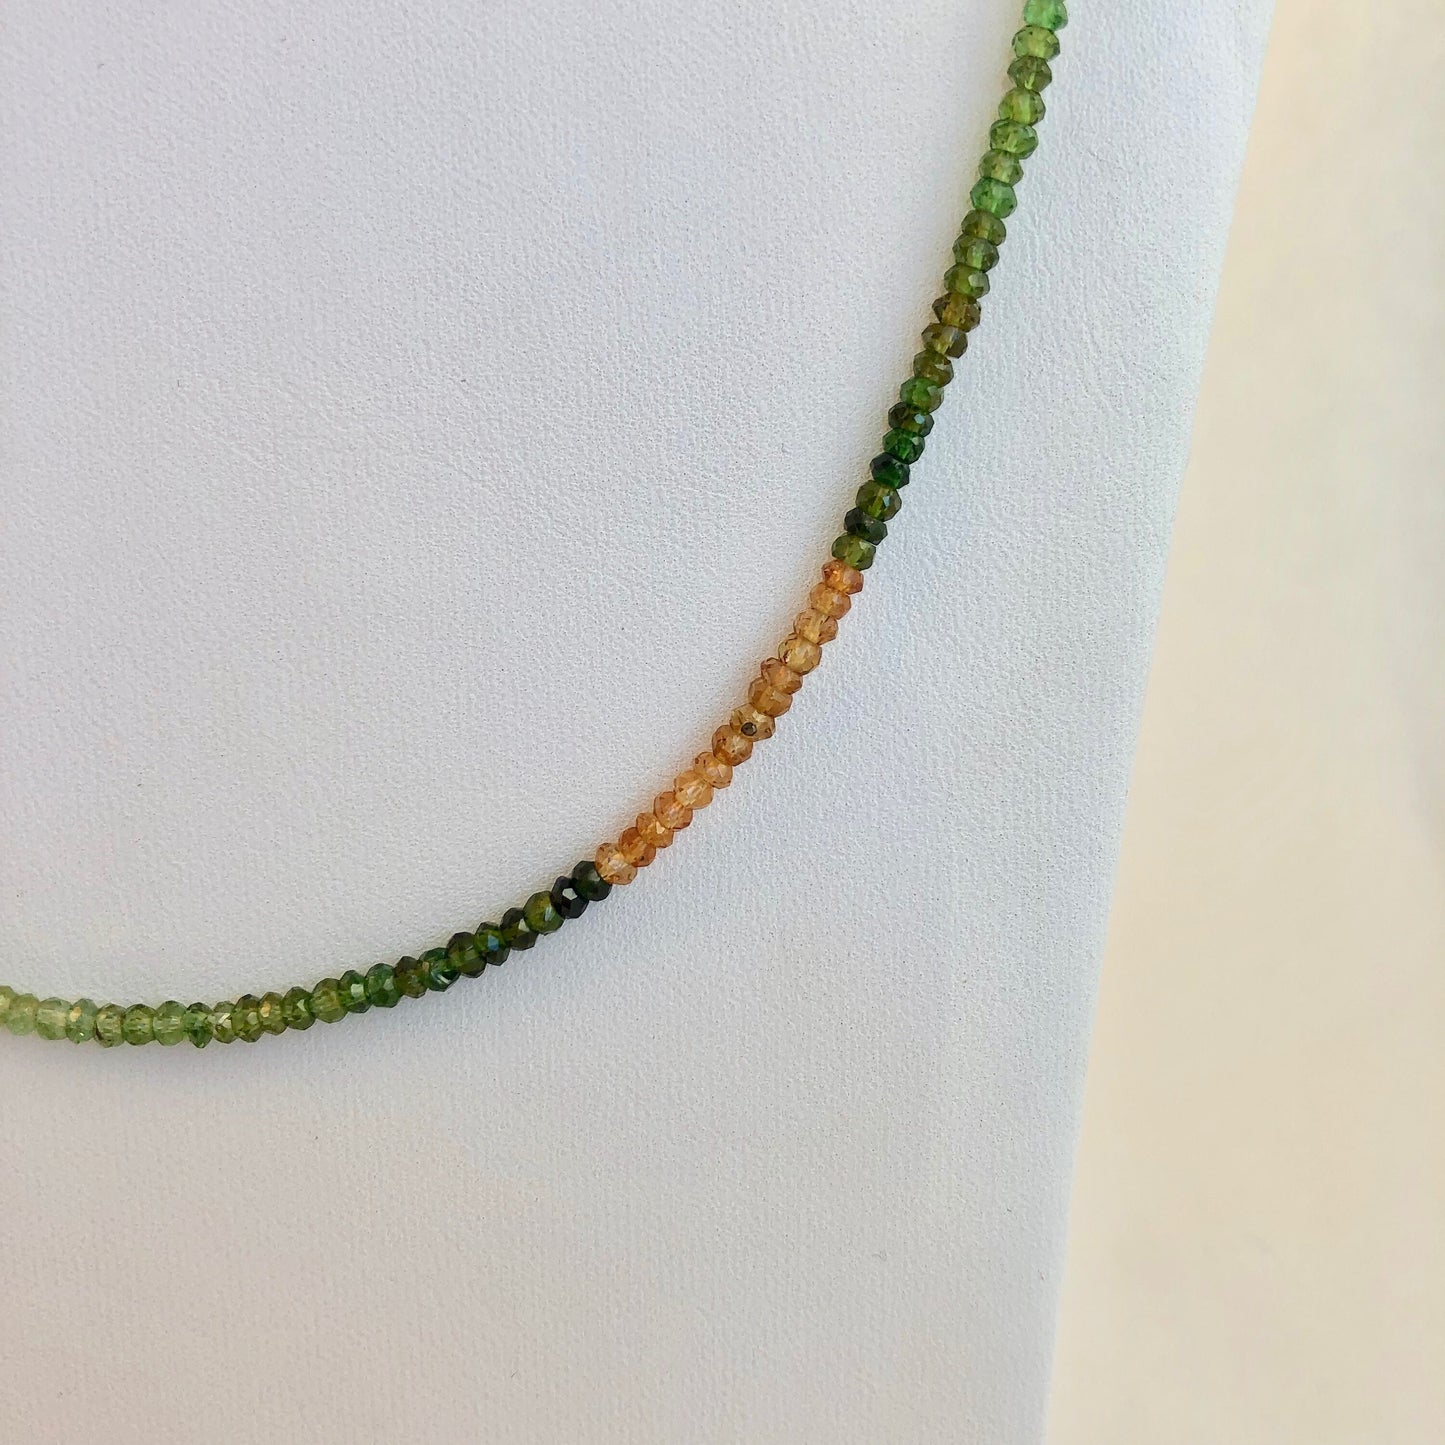 Soft and lovely tourmaline stone necklace, 19 " long, finished with a perfect sterling silver clasp.